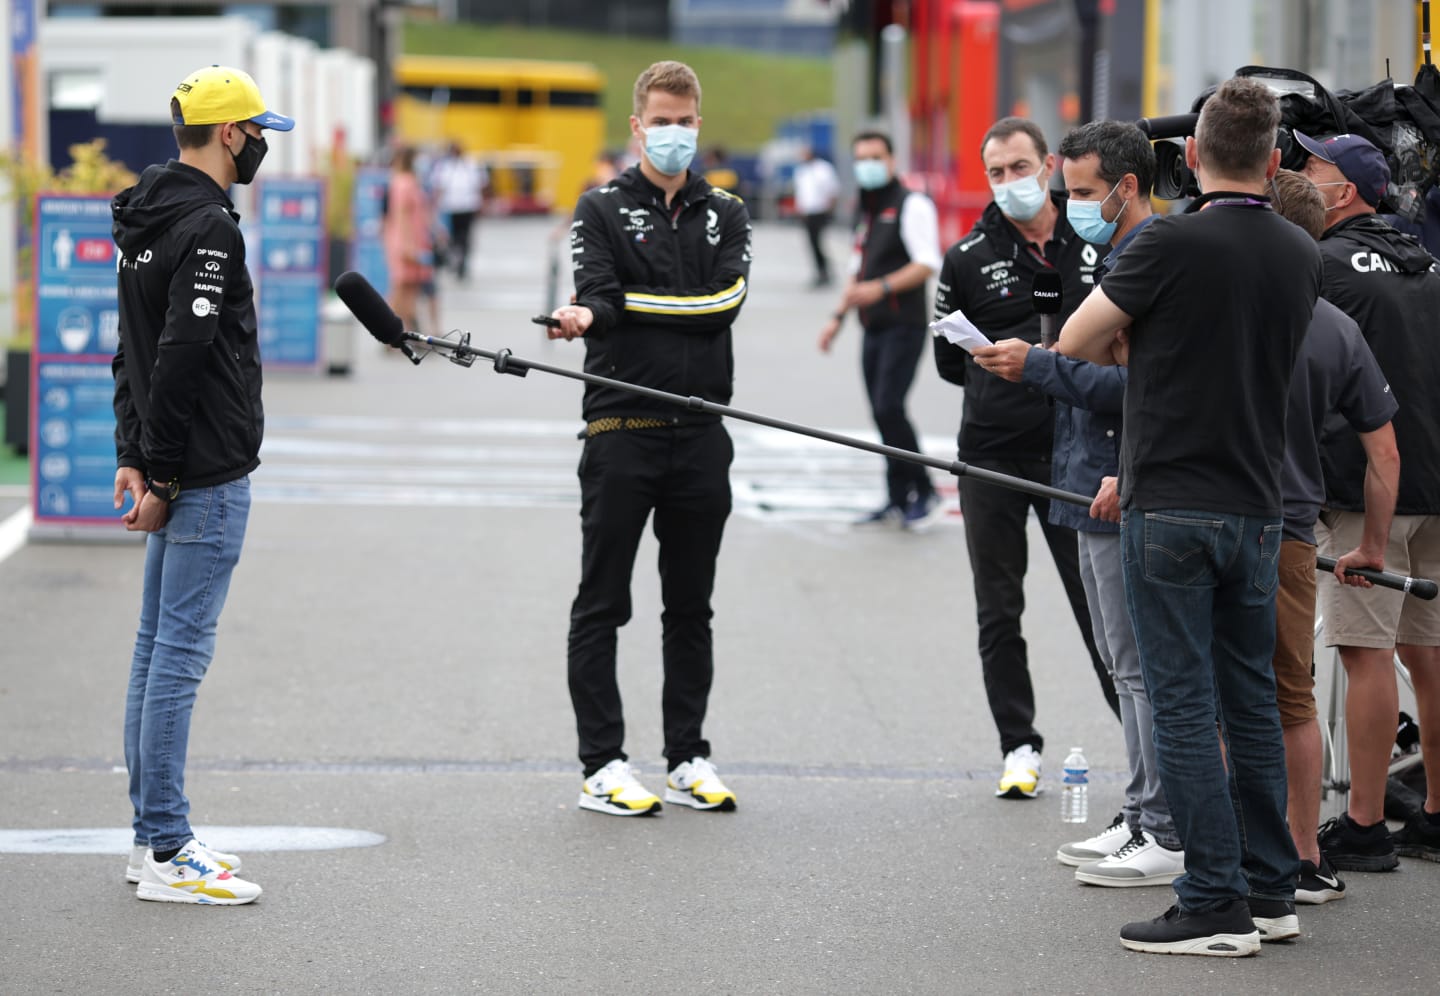 SPIELBERG, AUSTRIA - JULY 02: Esteban Ocon of France and Renault Sport F1 is interviewed in the